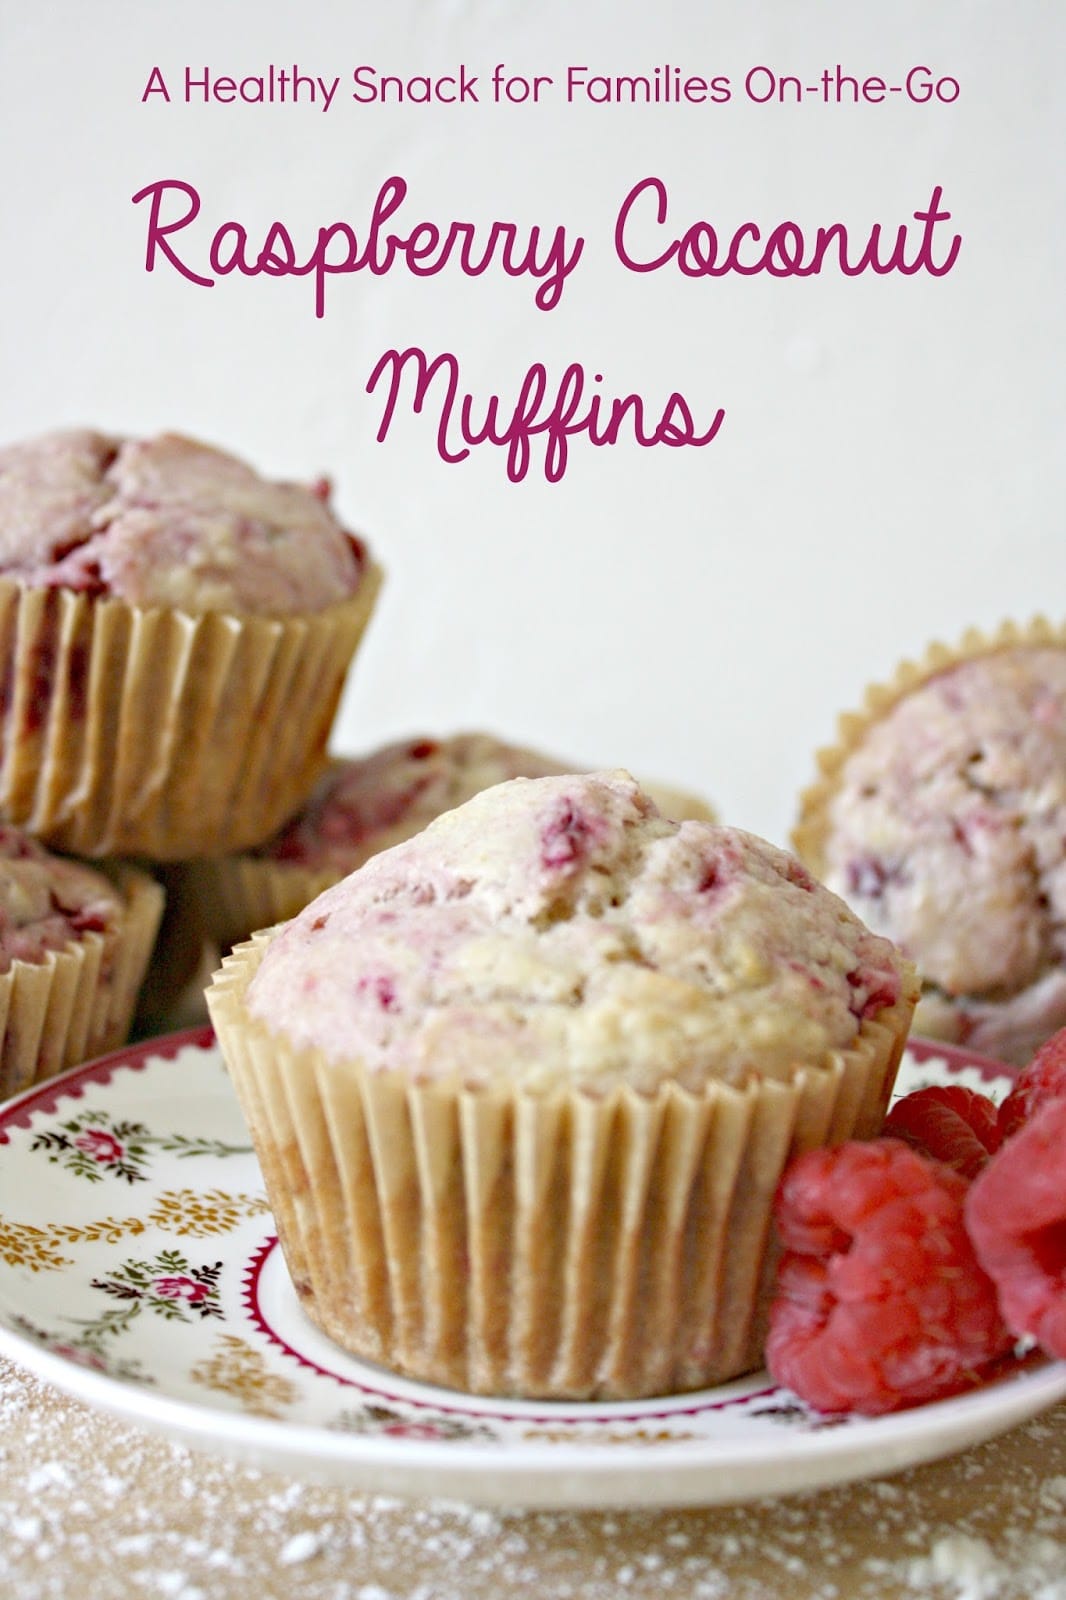 Back to School Breakfasts: Healthy Eats for On The Go Families, Raspberry Coconut Muffins